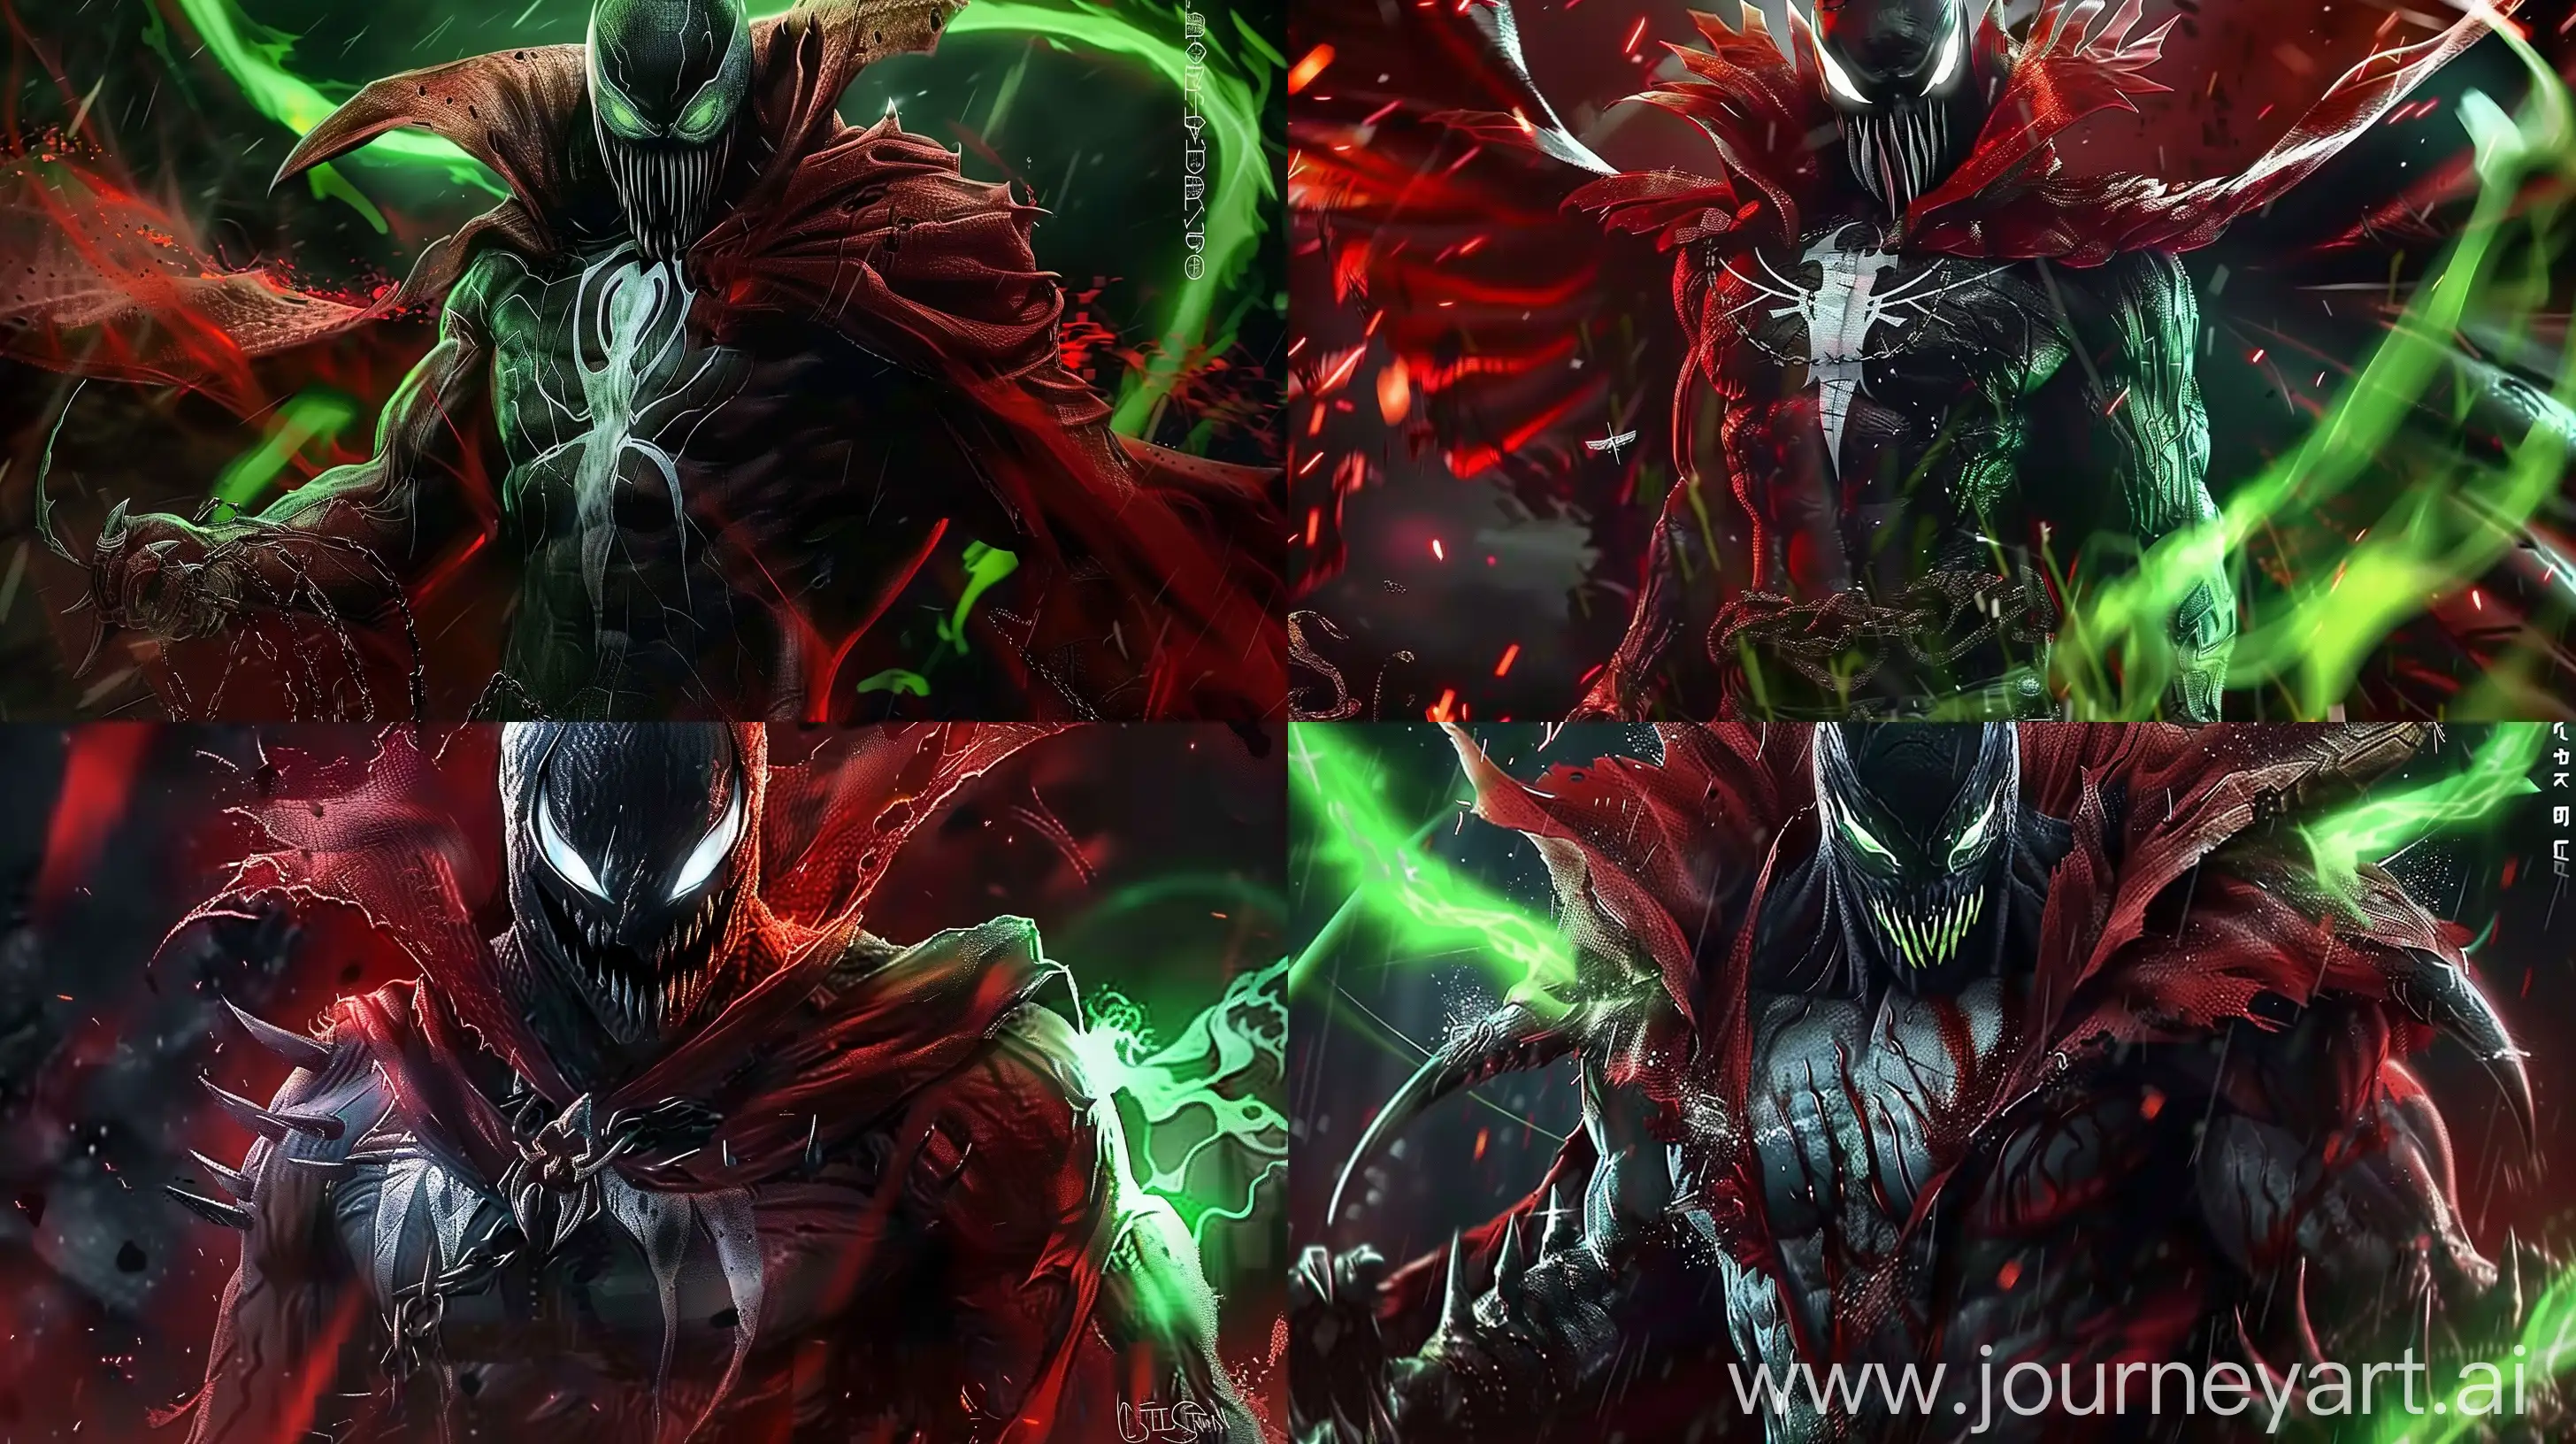 Enraged-Spawn-Action-Scene-in-Realistic-Anime-Style